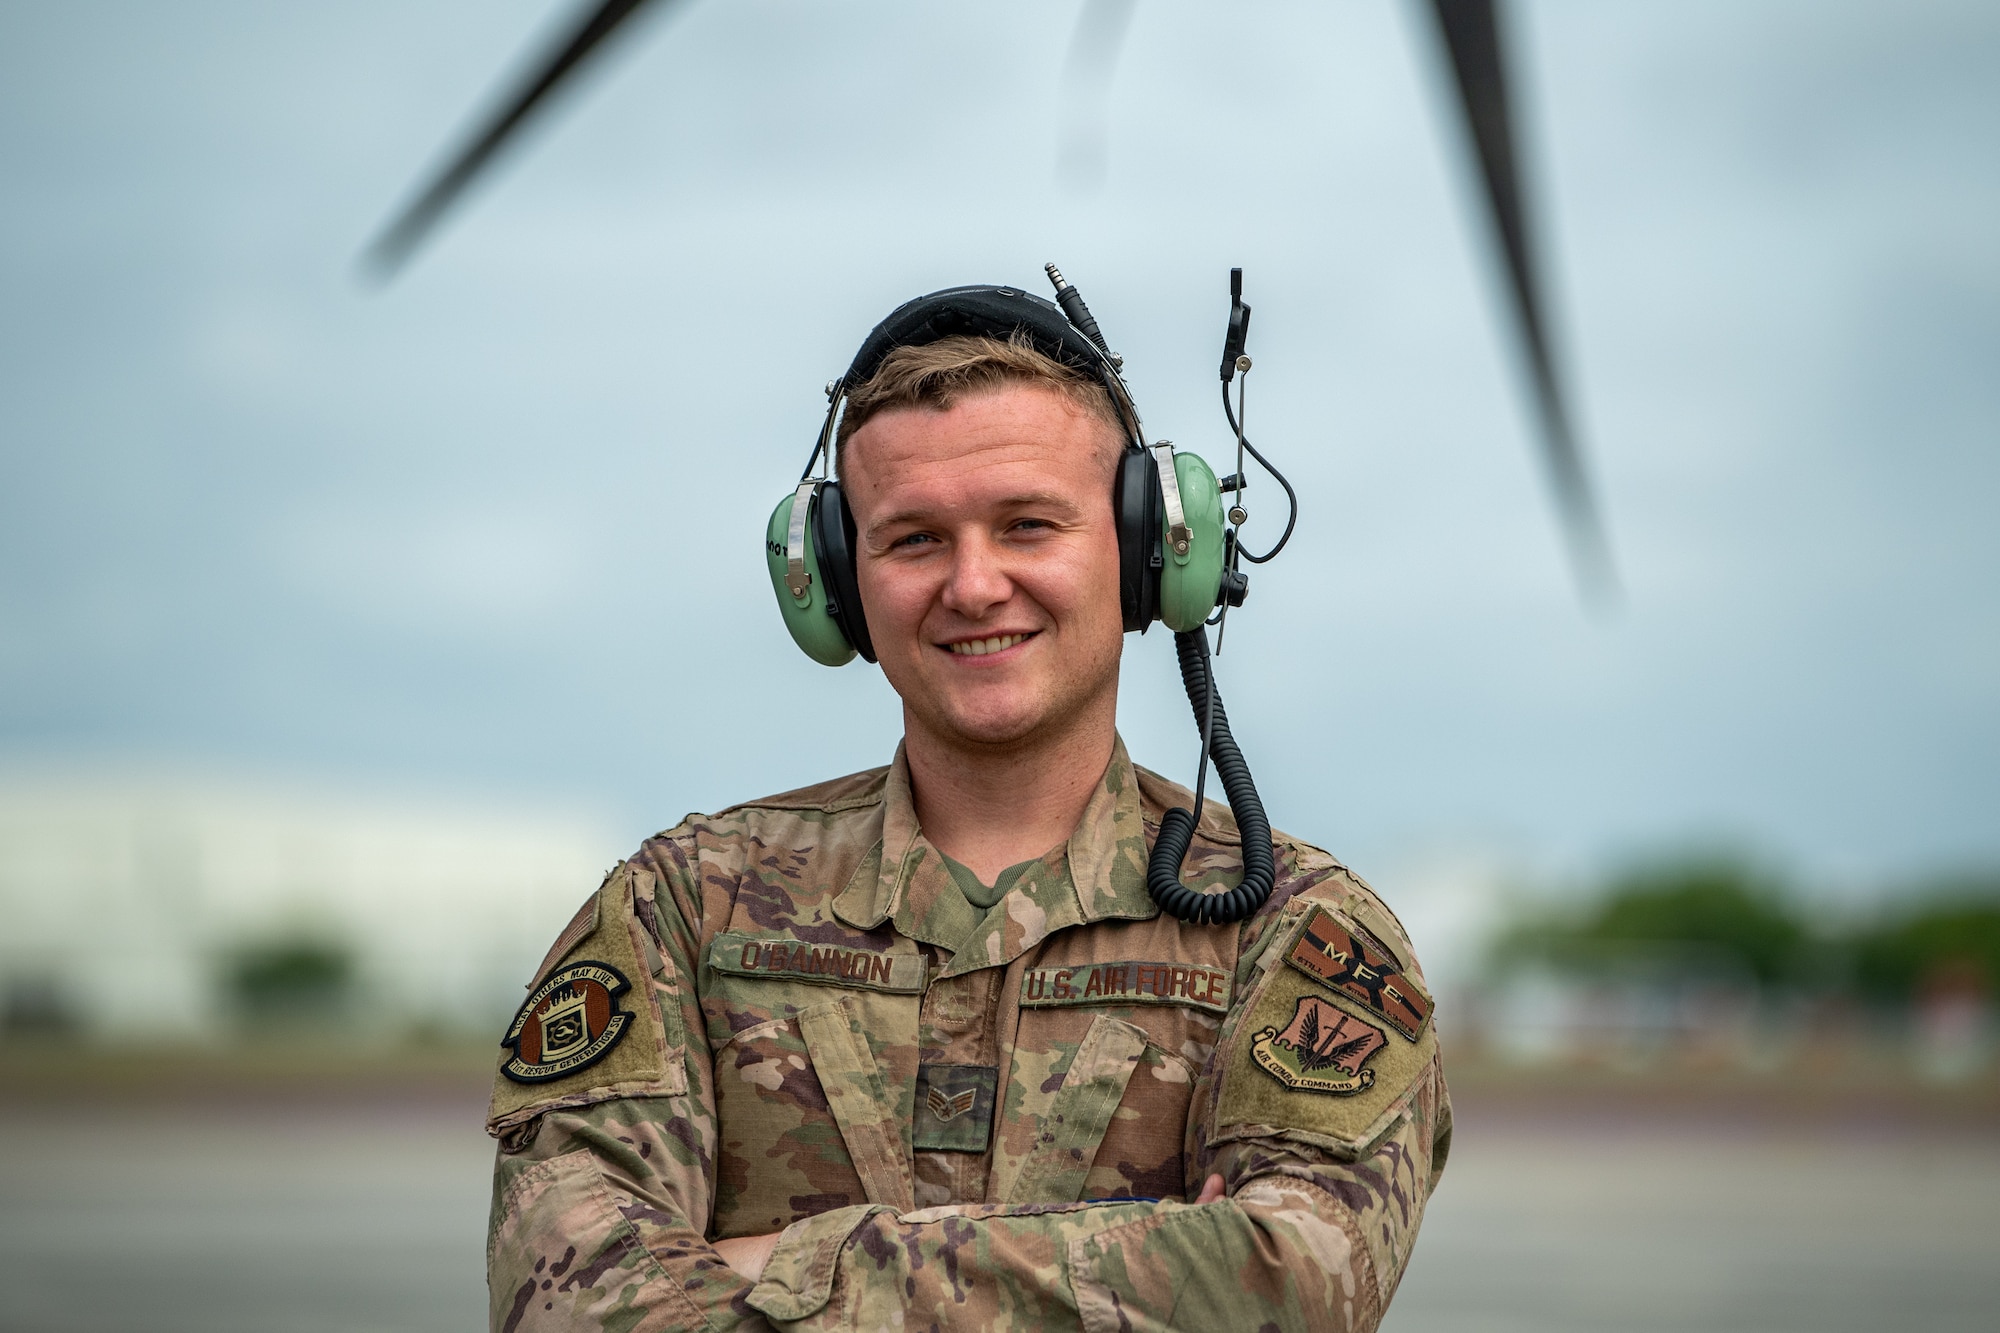 U.S. Air Force Senior Airman Collin O’Bannon, 71st Rescue Generation Squadron engine troop, poses for a photo during Exercise Ready Tiger 24-1 at Savannah Air National Guard Base, Georgia, April 10, 2024. During Ready Tiger 24-1, the 23rd Wing will be evaluated on the integration of Air Force Force Generation principles such as Agile Combat Employment, integrated combat turns, forward aerial refueling points, multi-capable Airmen, and combat search and rescue capabilities. (U.S. Air Force photo by Senior Airman Courtney Sebastianelli)